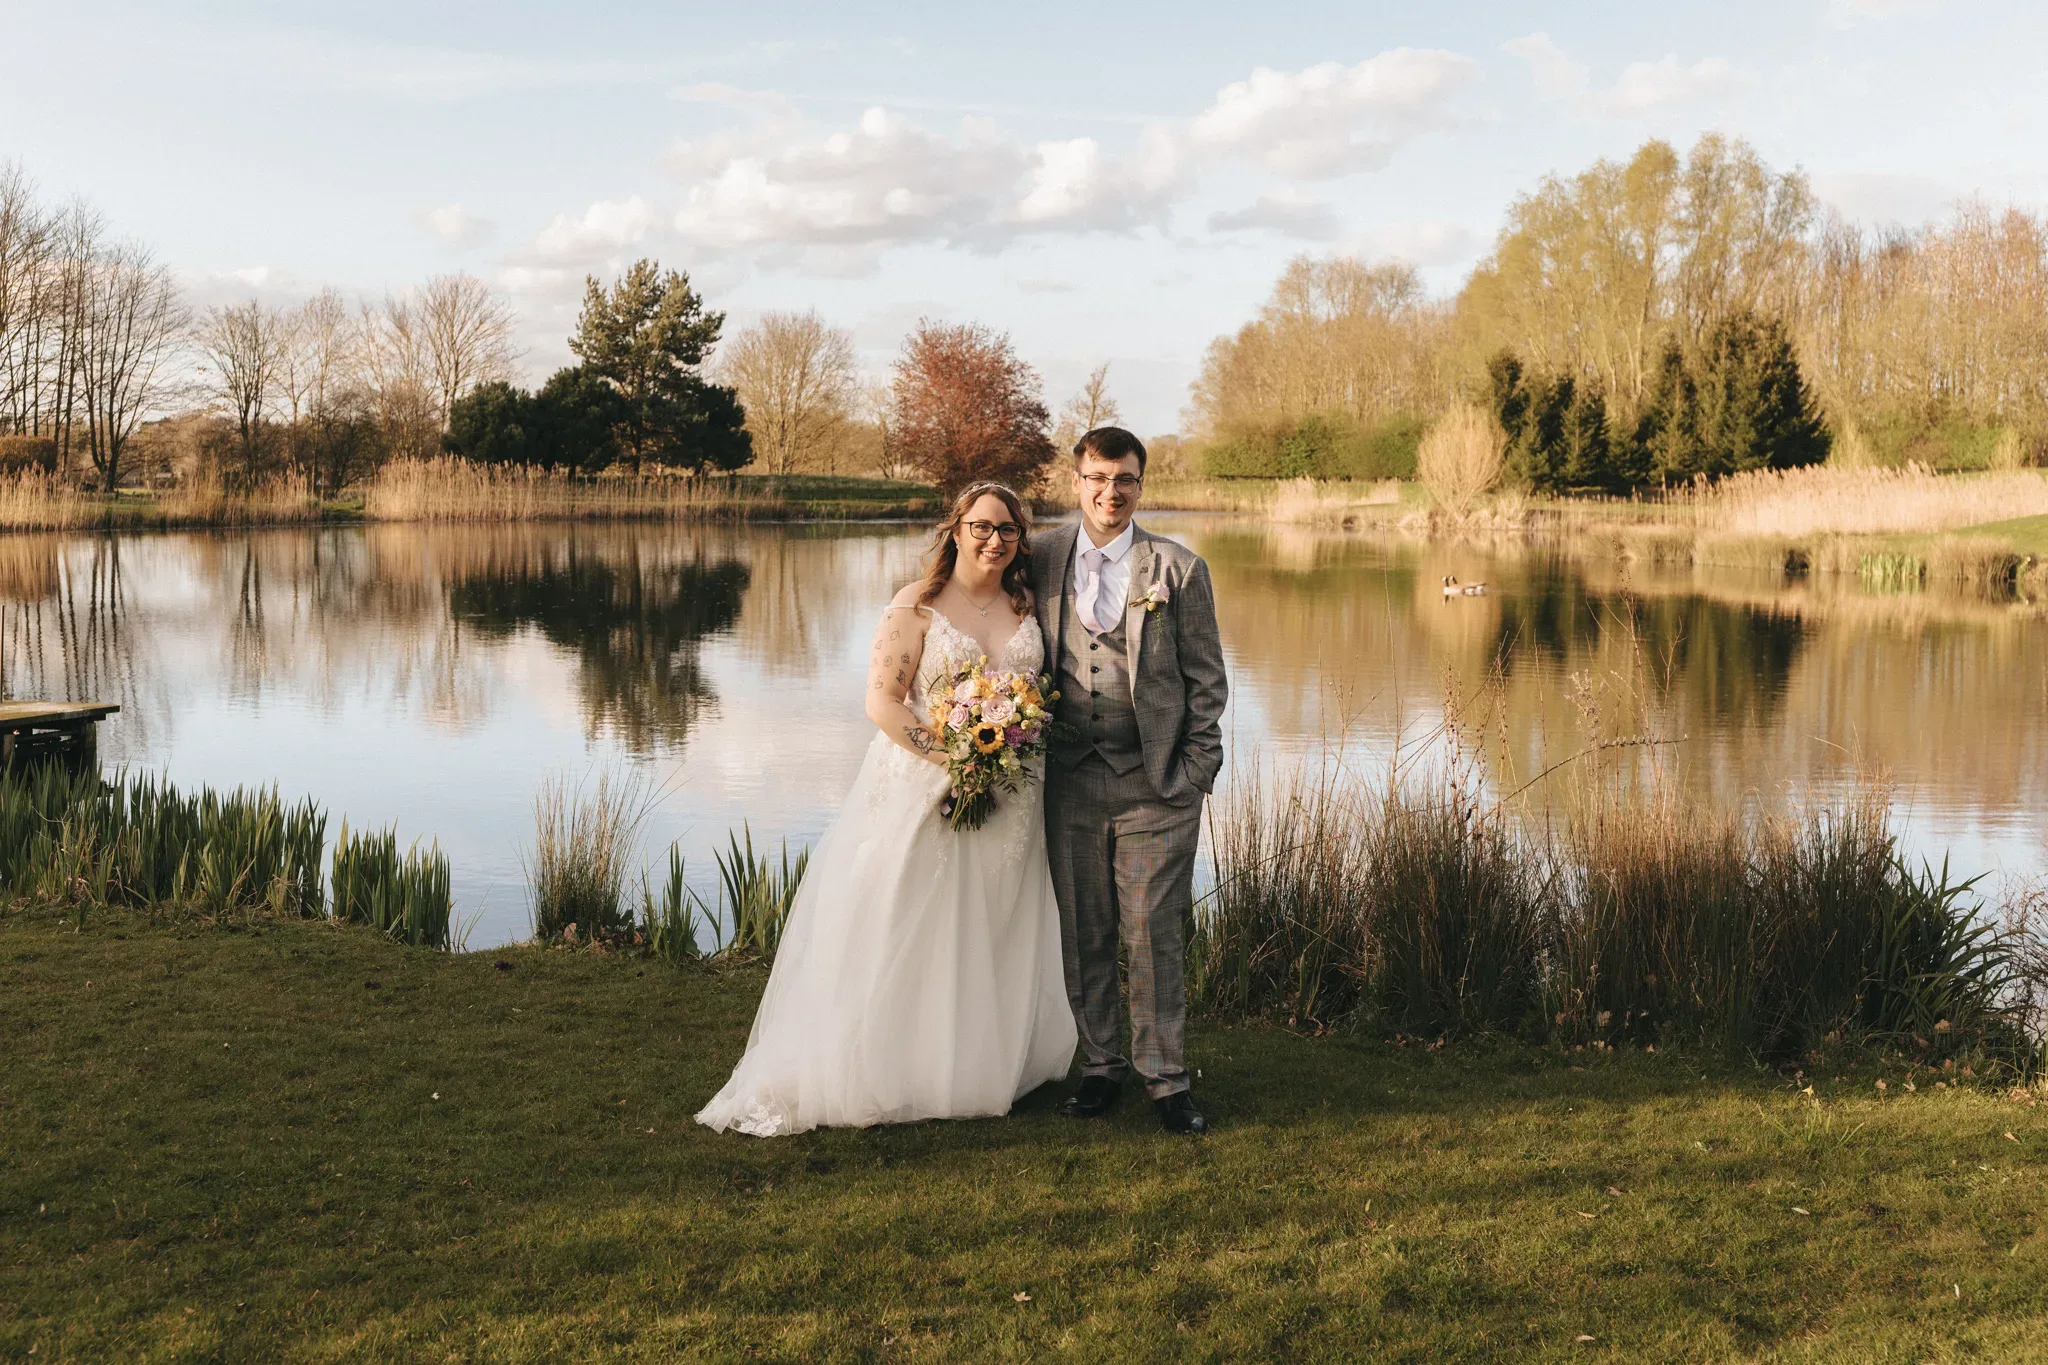 A smiling bride and groom stand by a serene pond surrounded by lush greenery under a soft sky, reflecting their joy on their wedding day.